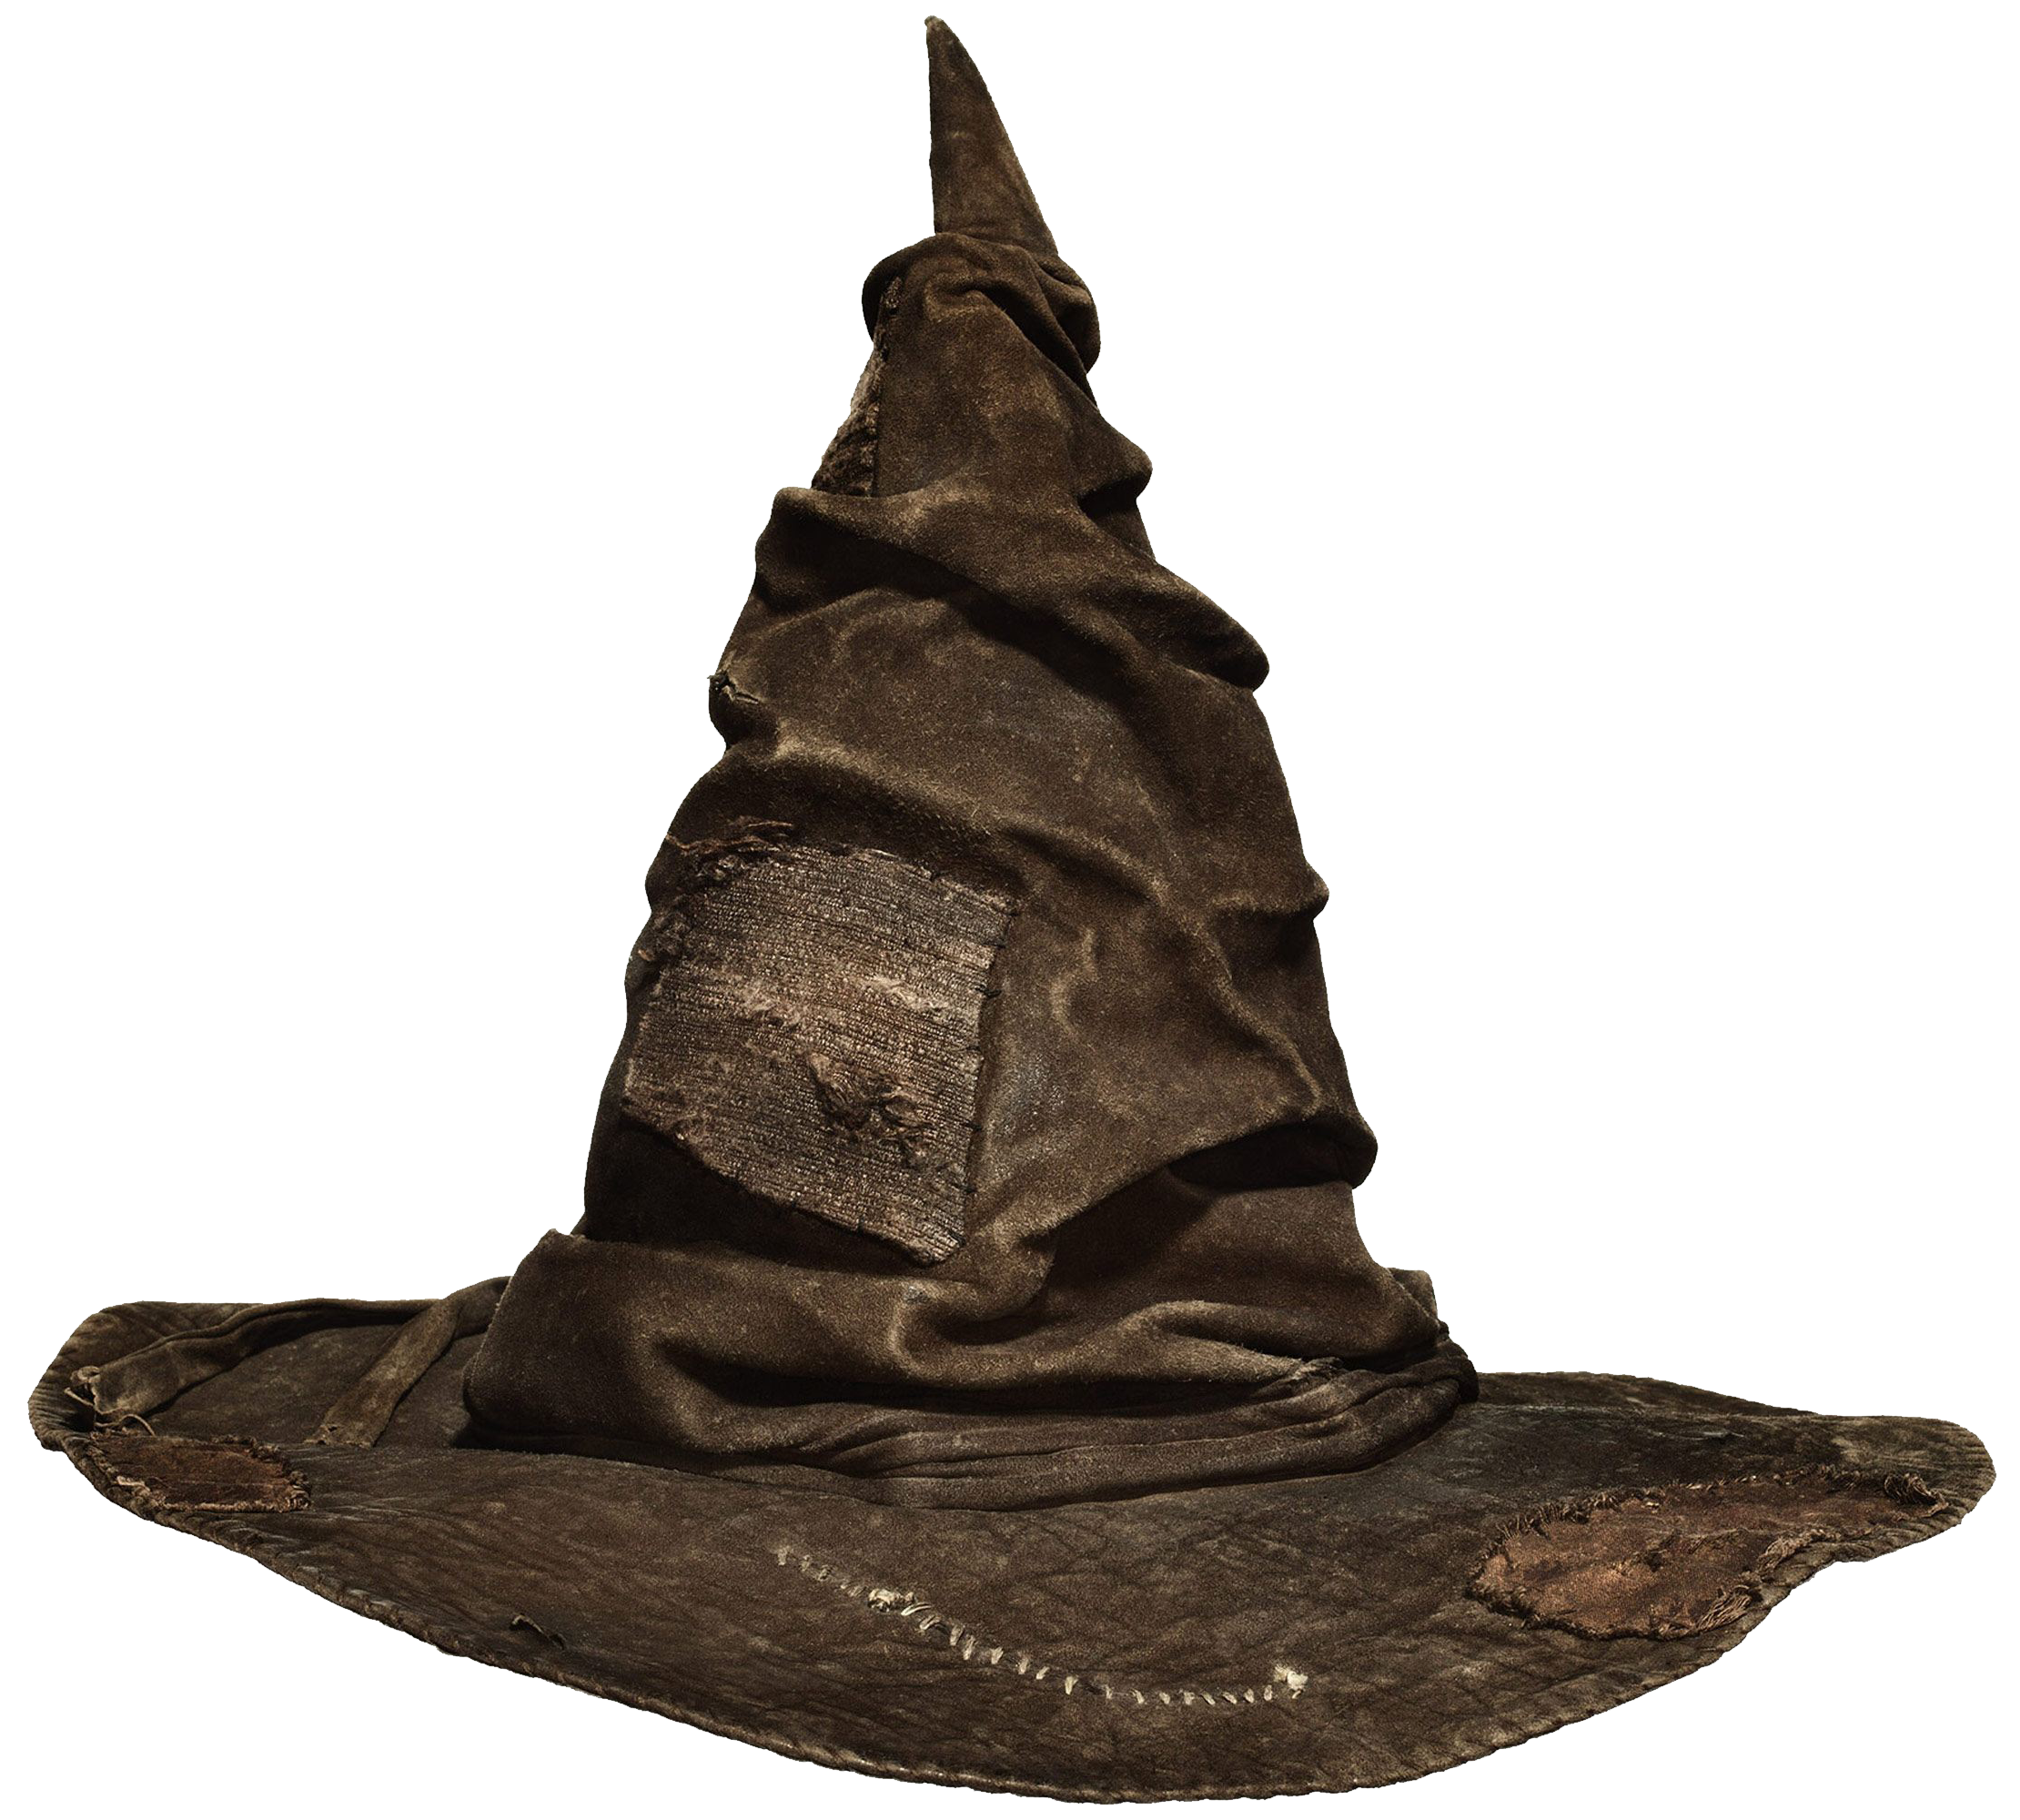 What are the traits of the Sorting Hat?